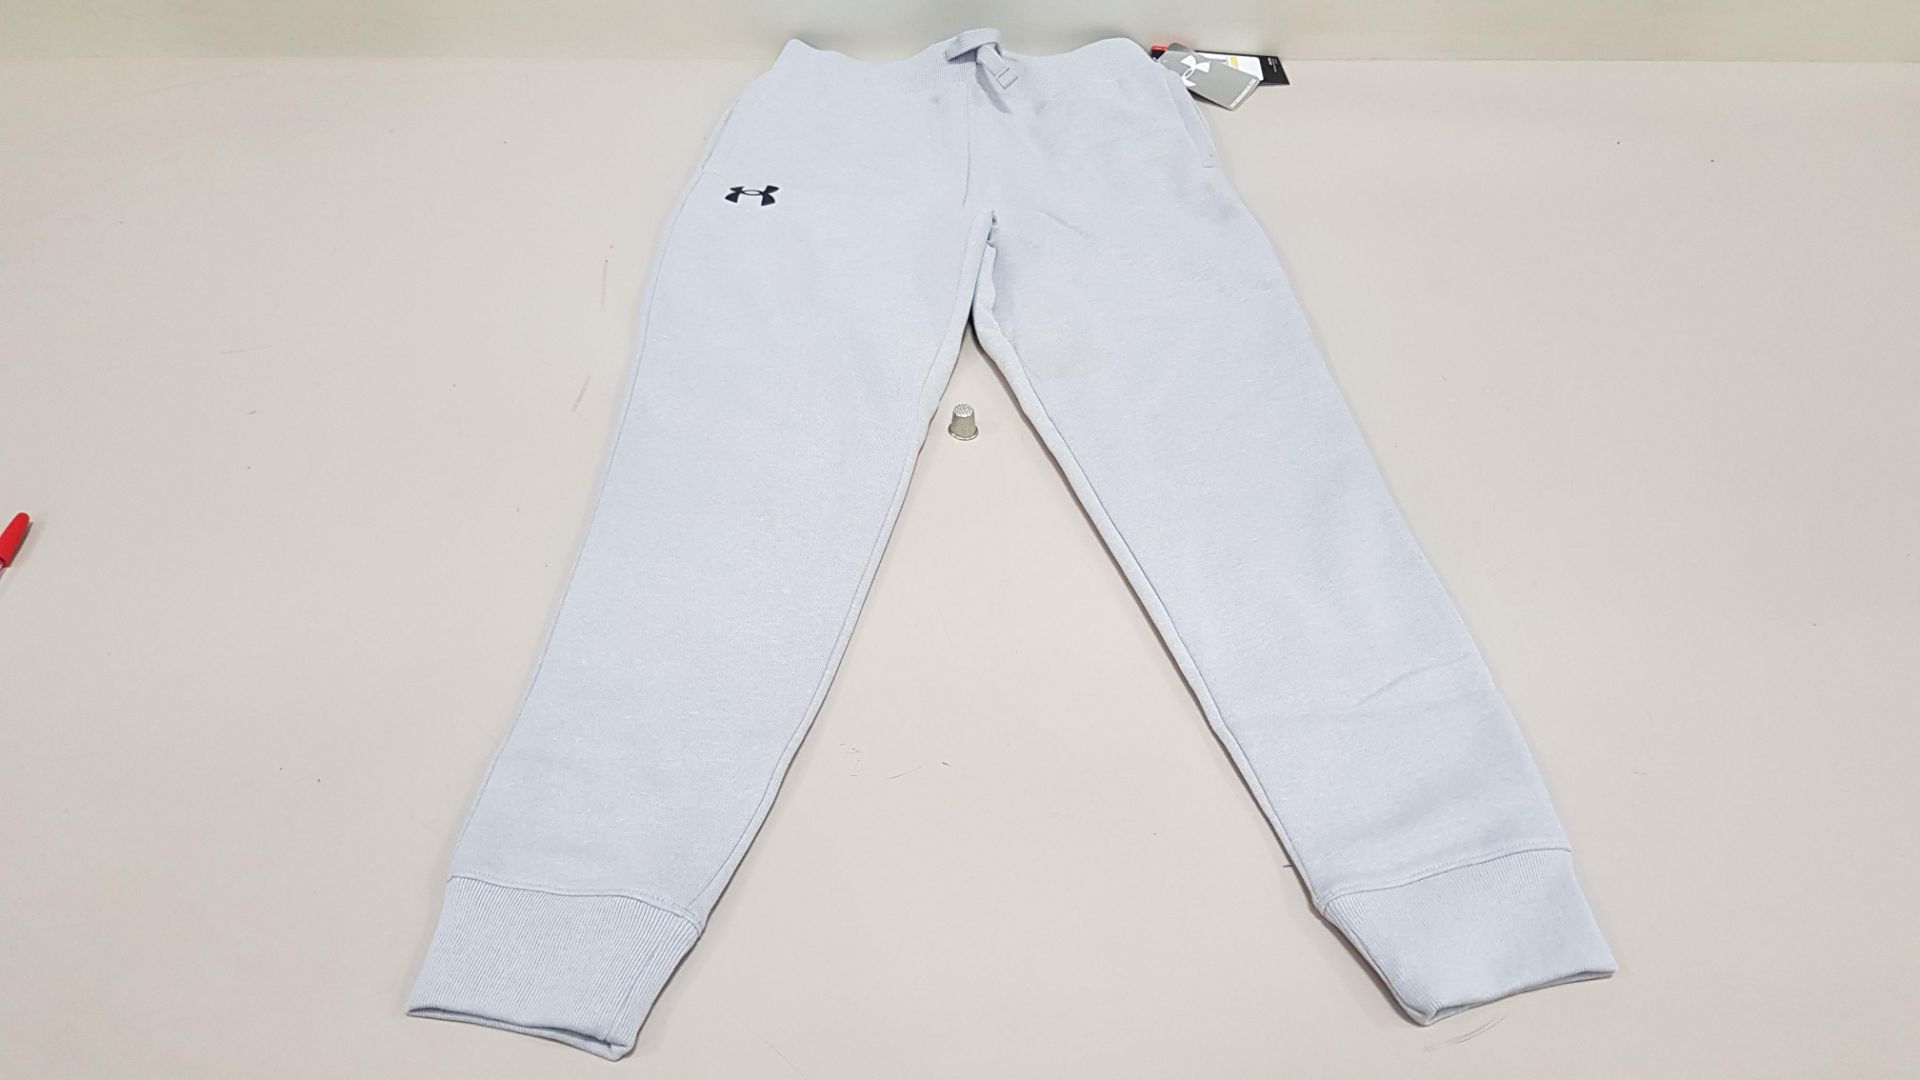 8 X BRAND NEW UNDER ARMOUR BOYS UNDER ARMOUR PANTS SIZE YSM/P/CH